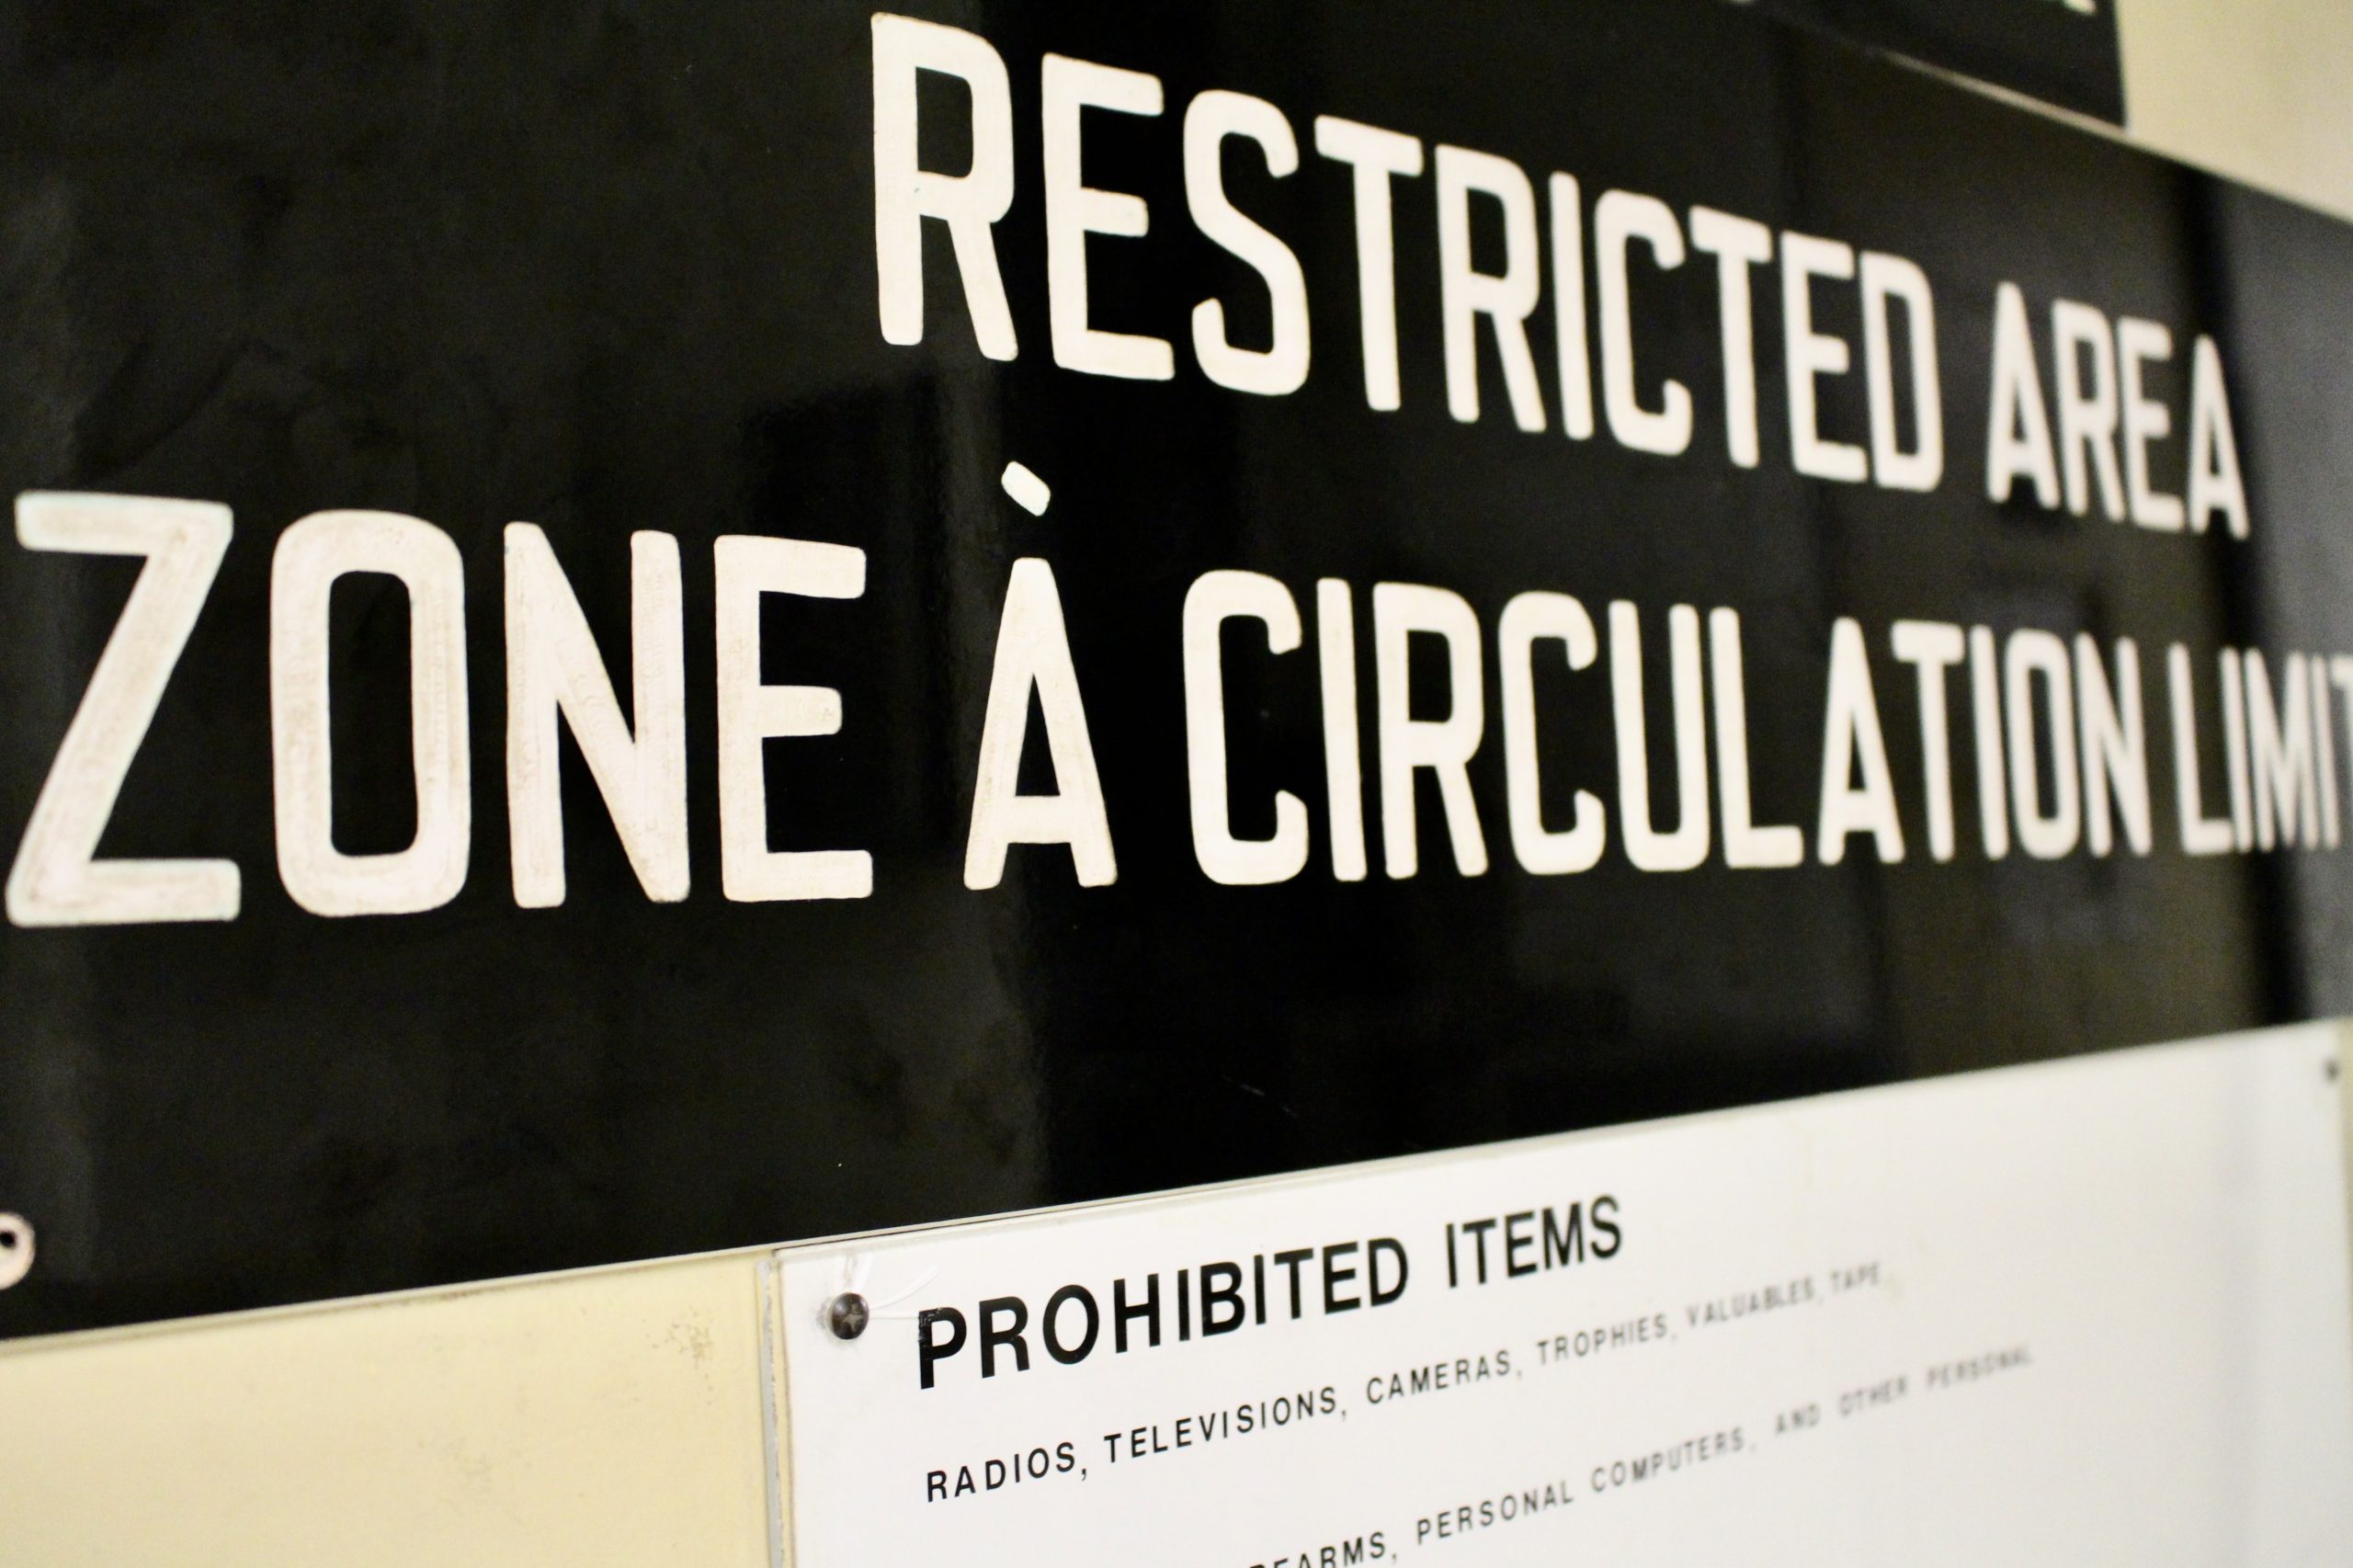 "Restricted Area" sign located in the Diefenbunker: Canada's Cold War Museum. 